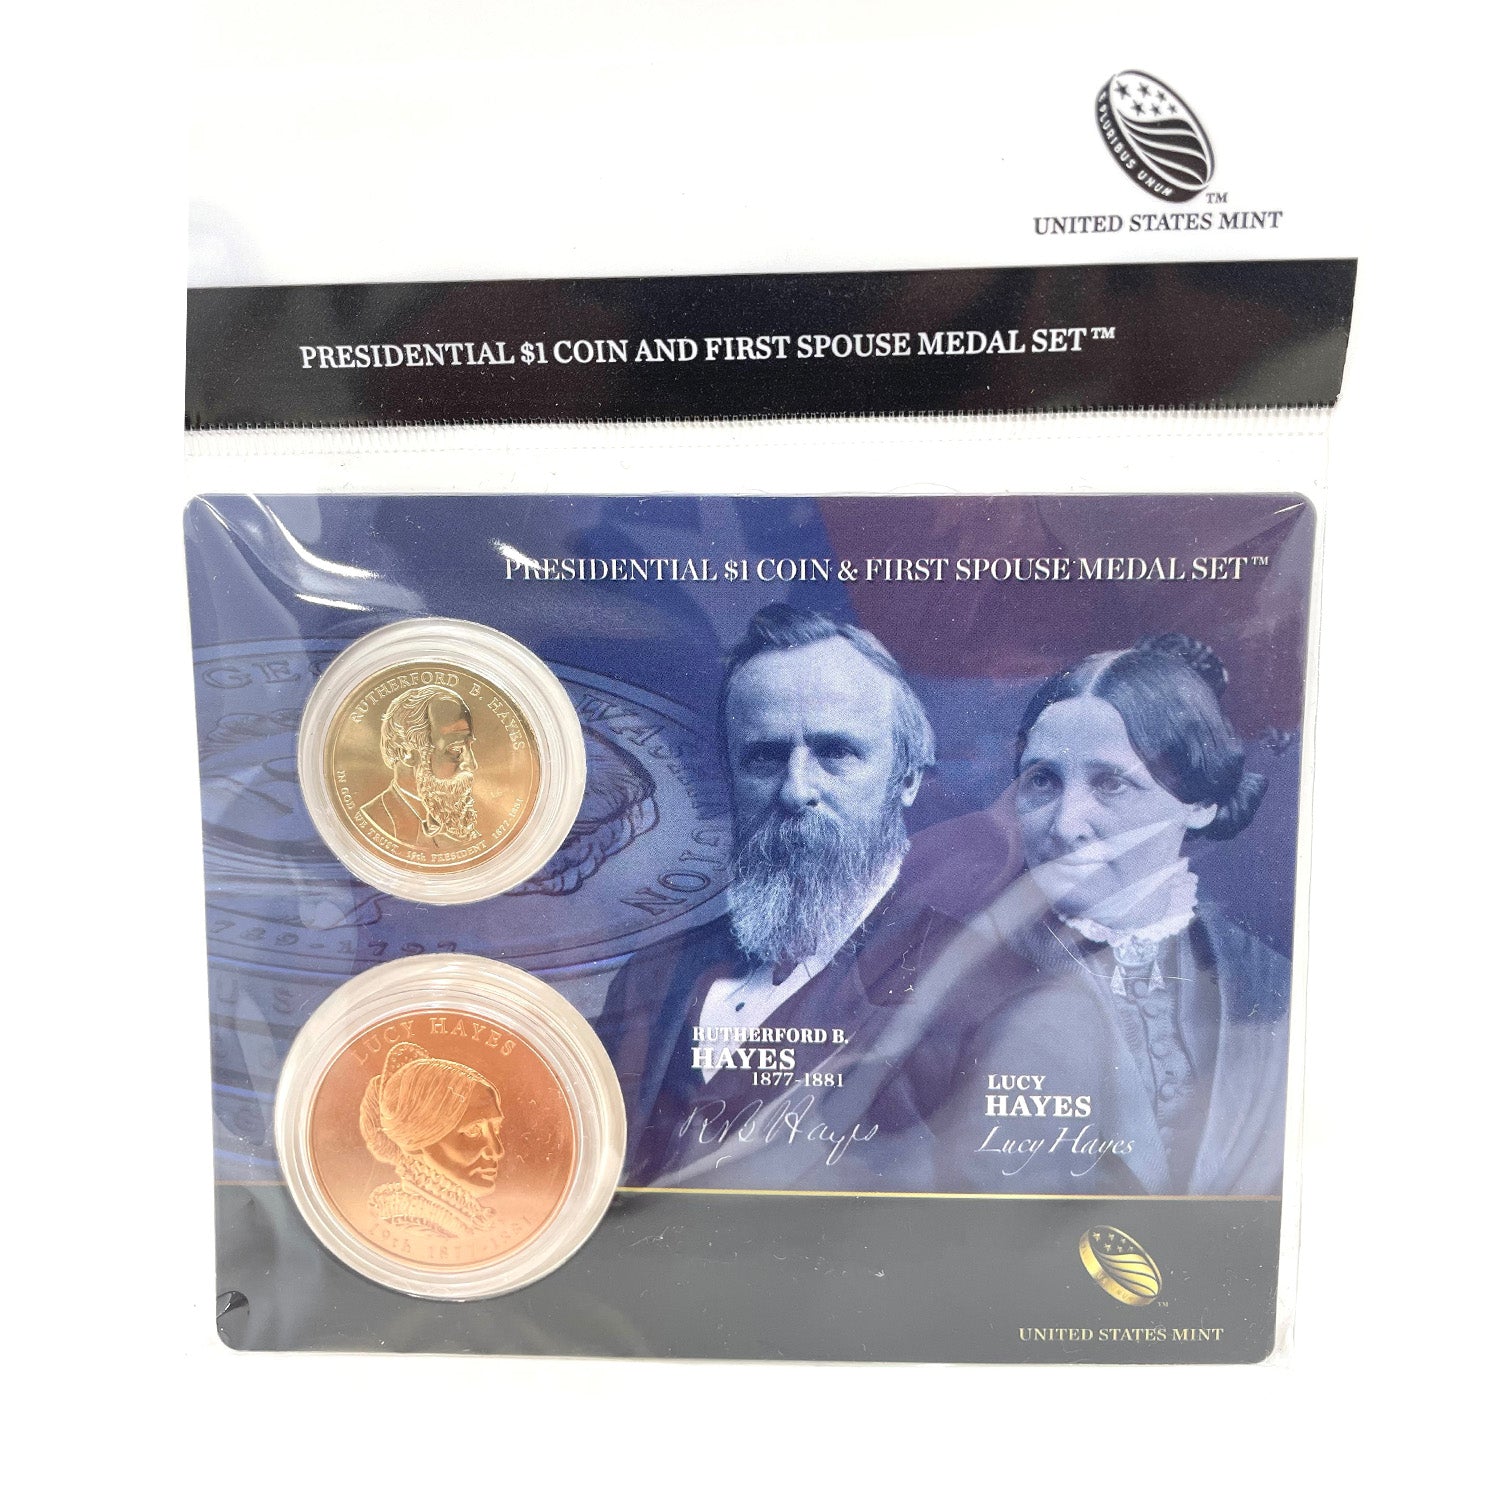 U.S. Mint Presidential $1 Coin and Spouse Medal Set: Rutherford & Lucy Hayes